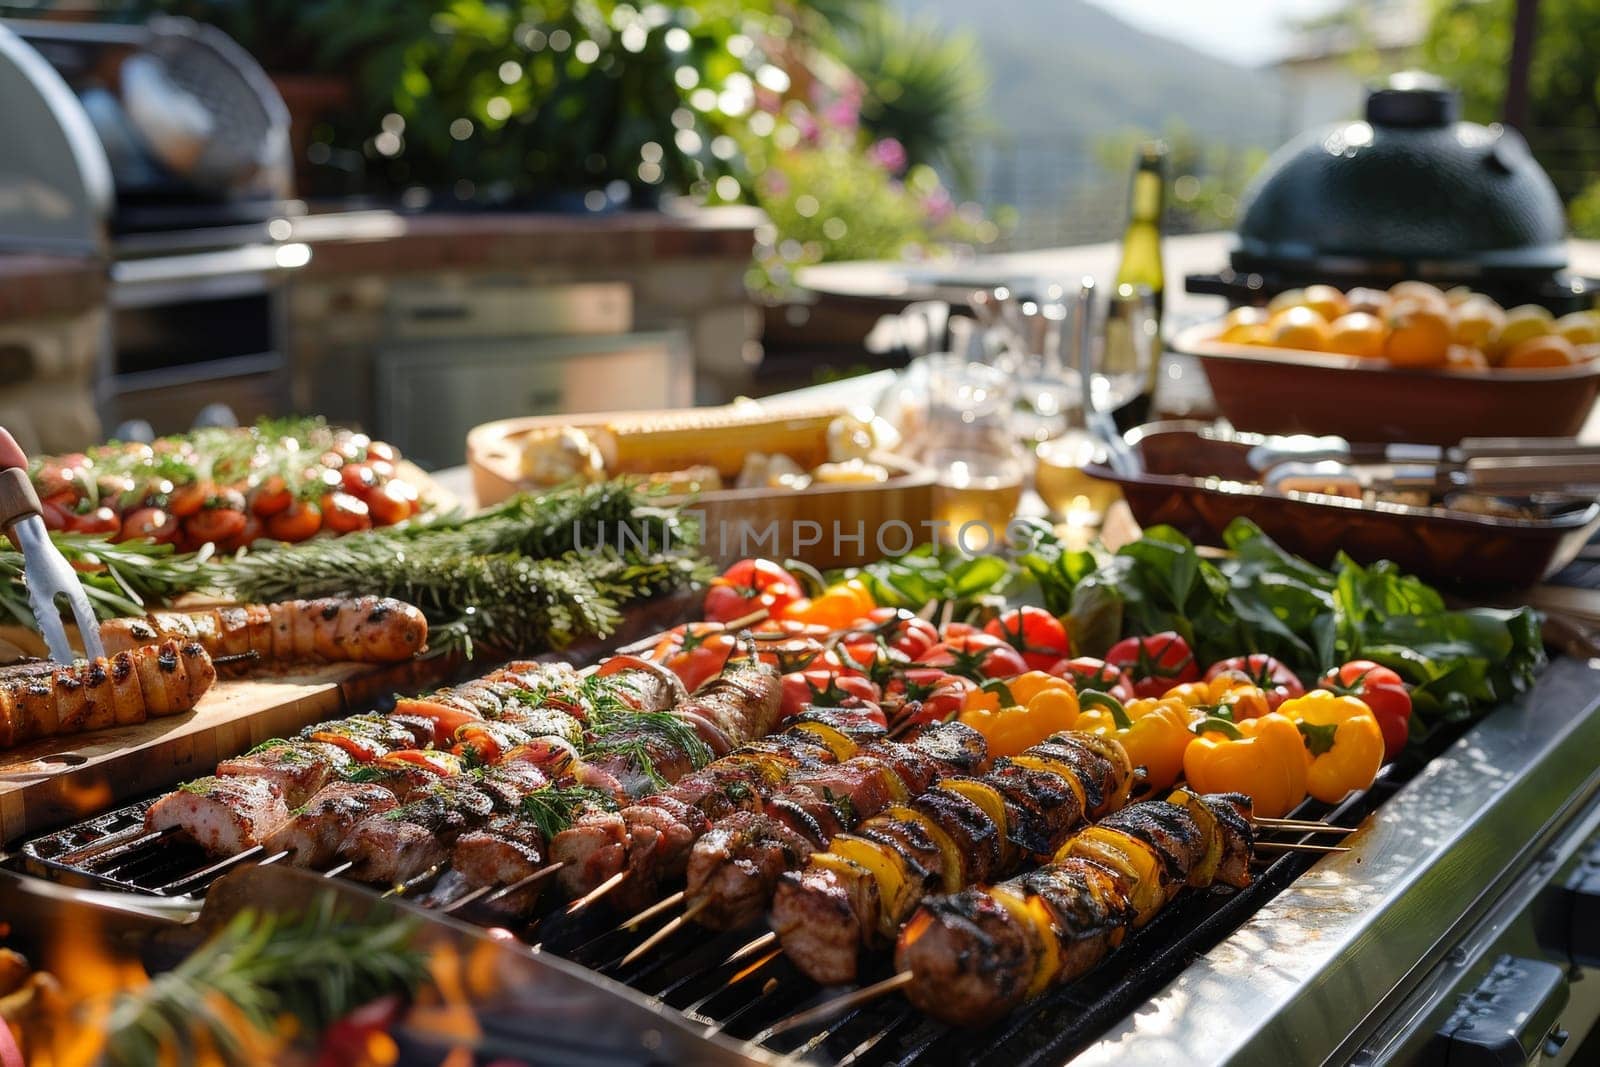 A grill is filled with a variety of meats and vegetables, including sausages, peppers, corn, and tomatoes. The food is cooking over an open flame, giving it a smoky, charred flavor